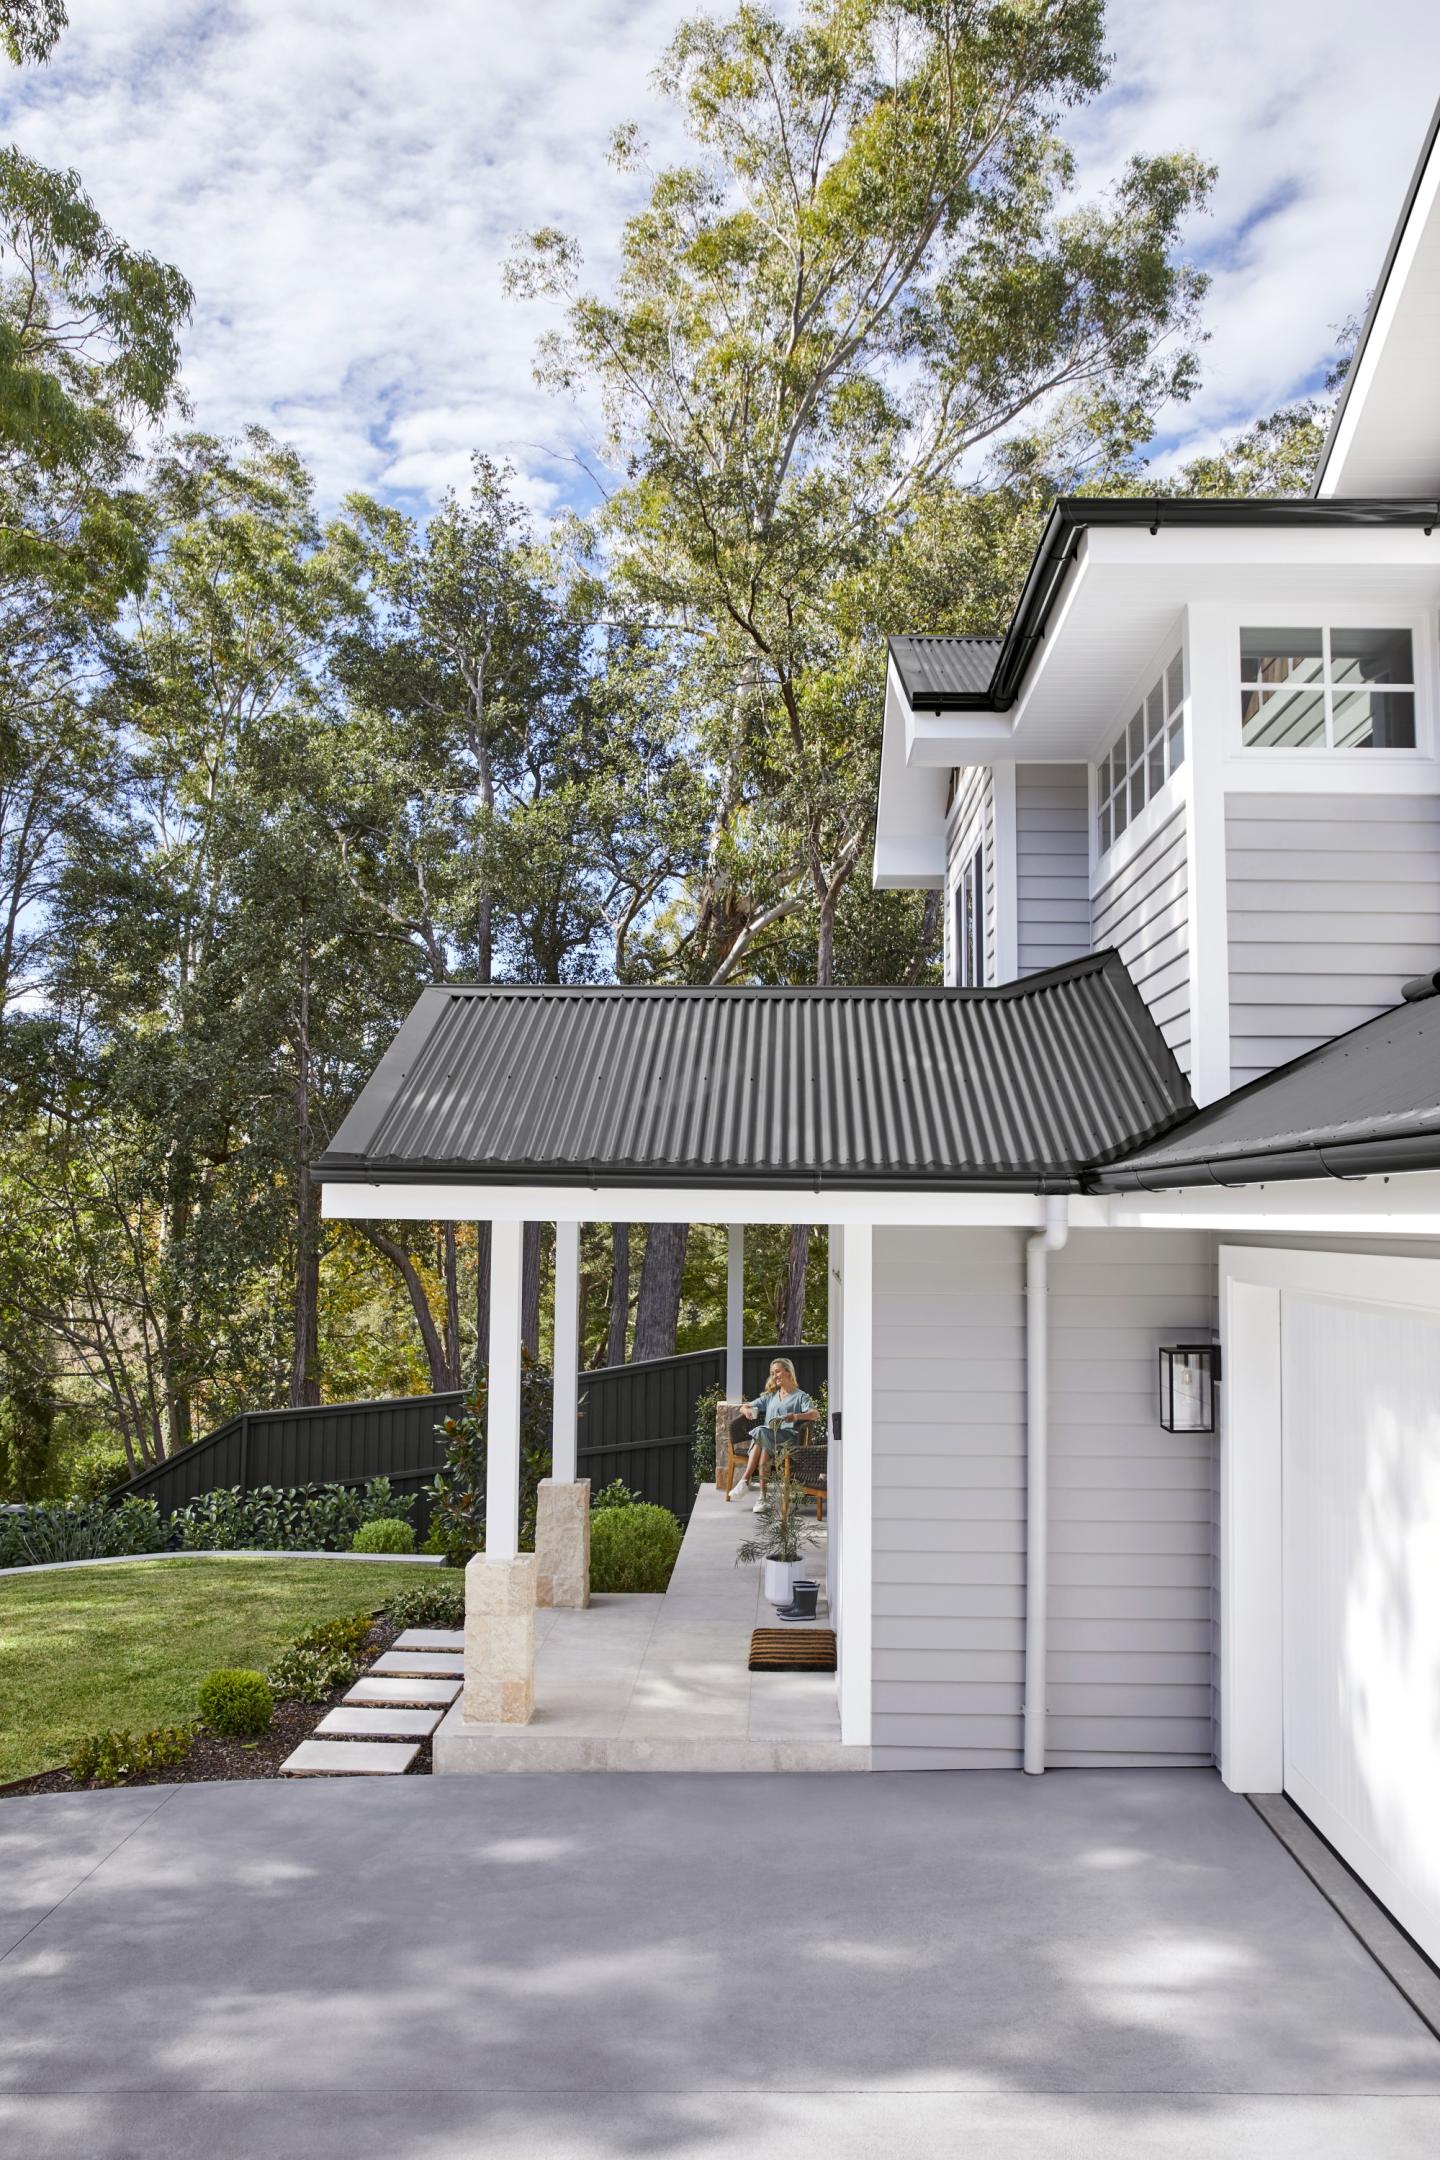 Wahroonga House with COLORBOND® steel in Woodland Grey in a classic finish